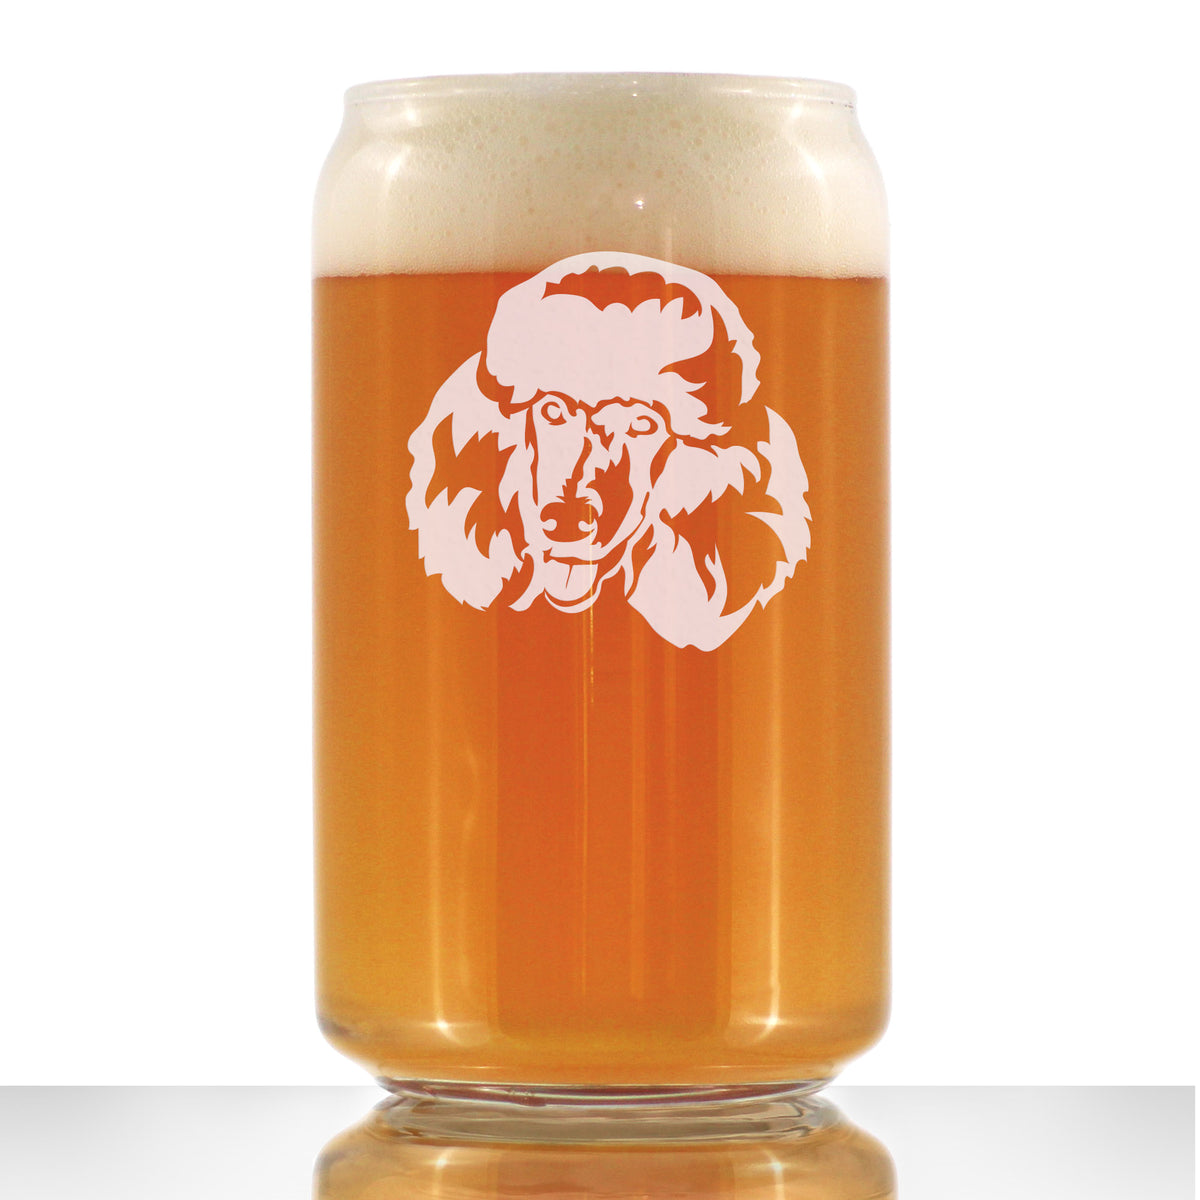 Happy Poodle - Beer Can Pint Glass - Fun Unique Poodle Themed Dog Gifts and Party Decor for Women and Men - 16 oz